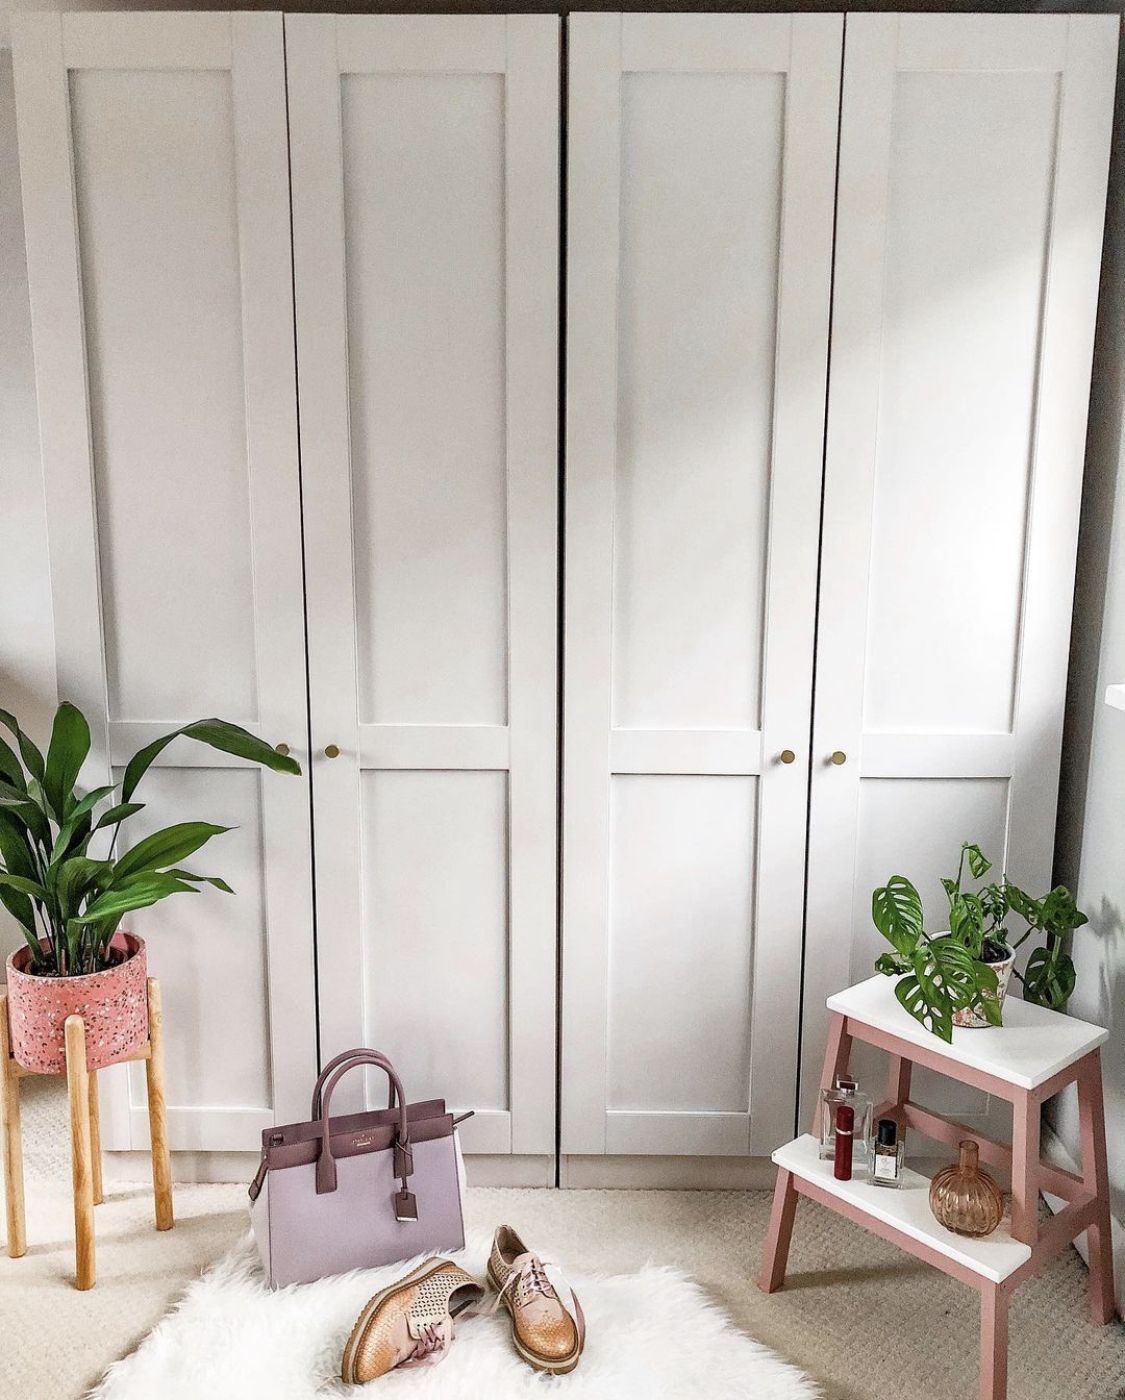 Our Budget Wardrobe Makeover For Under £35! – Boo & Maddie Inside Farrow And Ball Painted Wardrobes (Gallery 13 of 20)